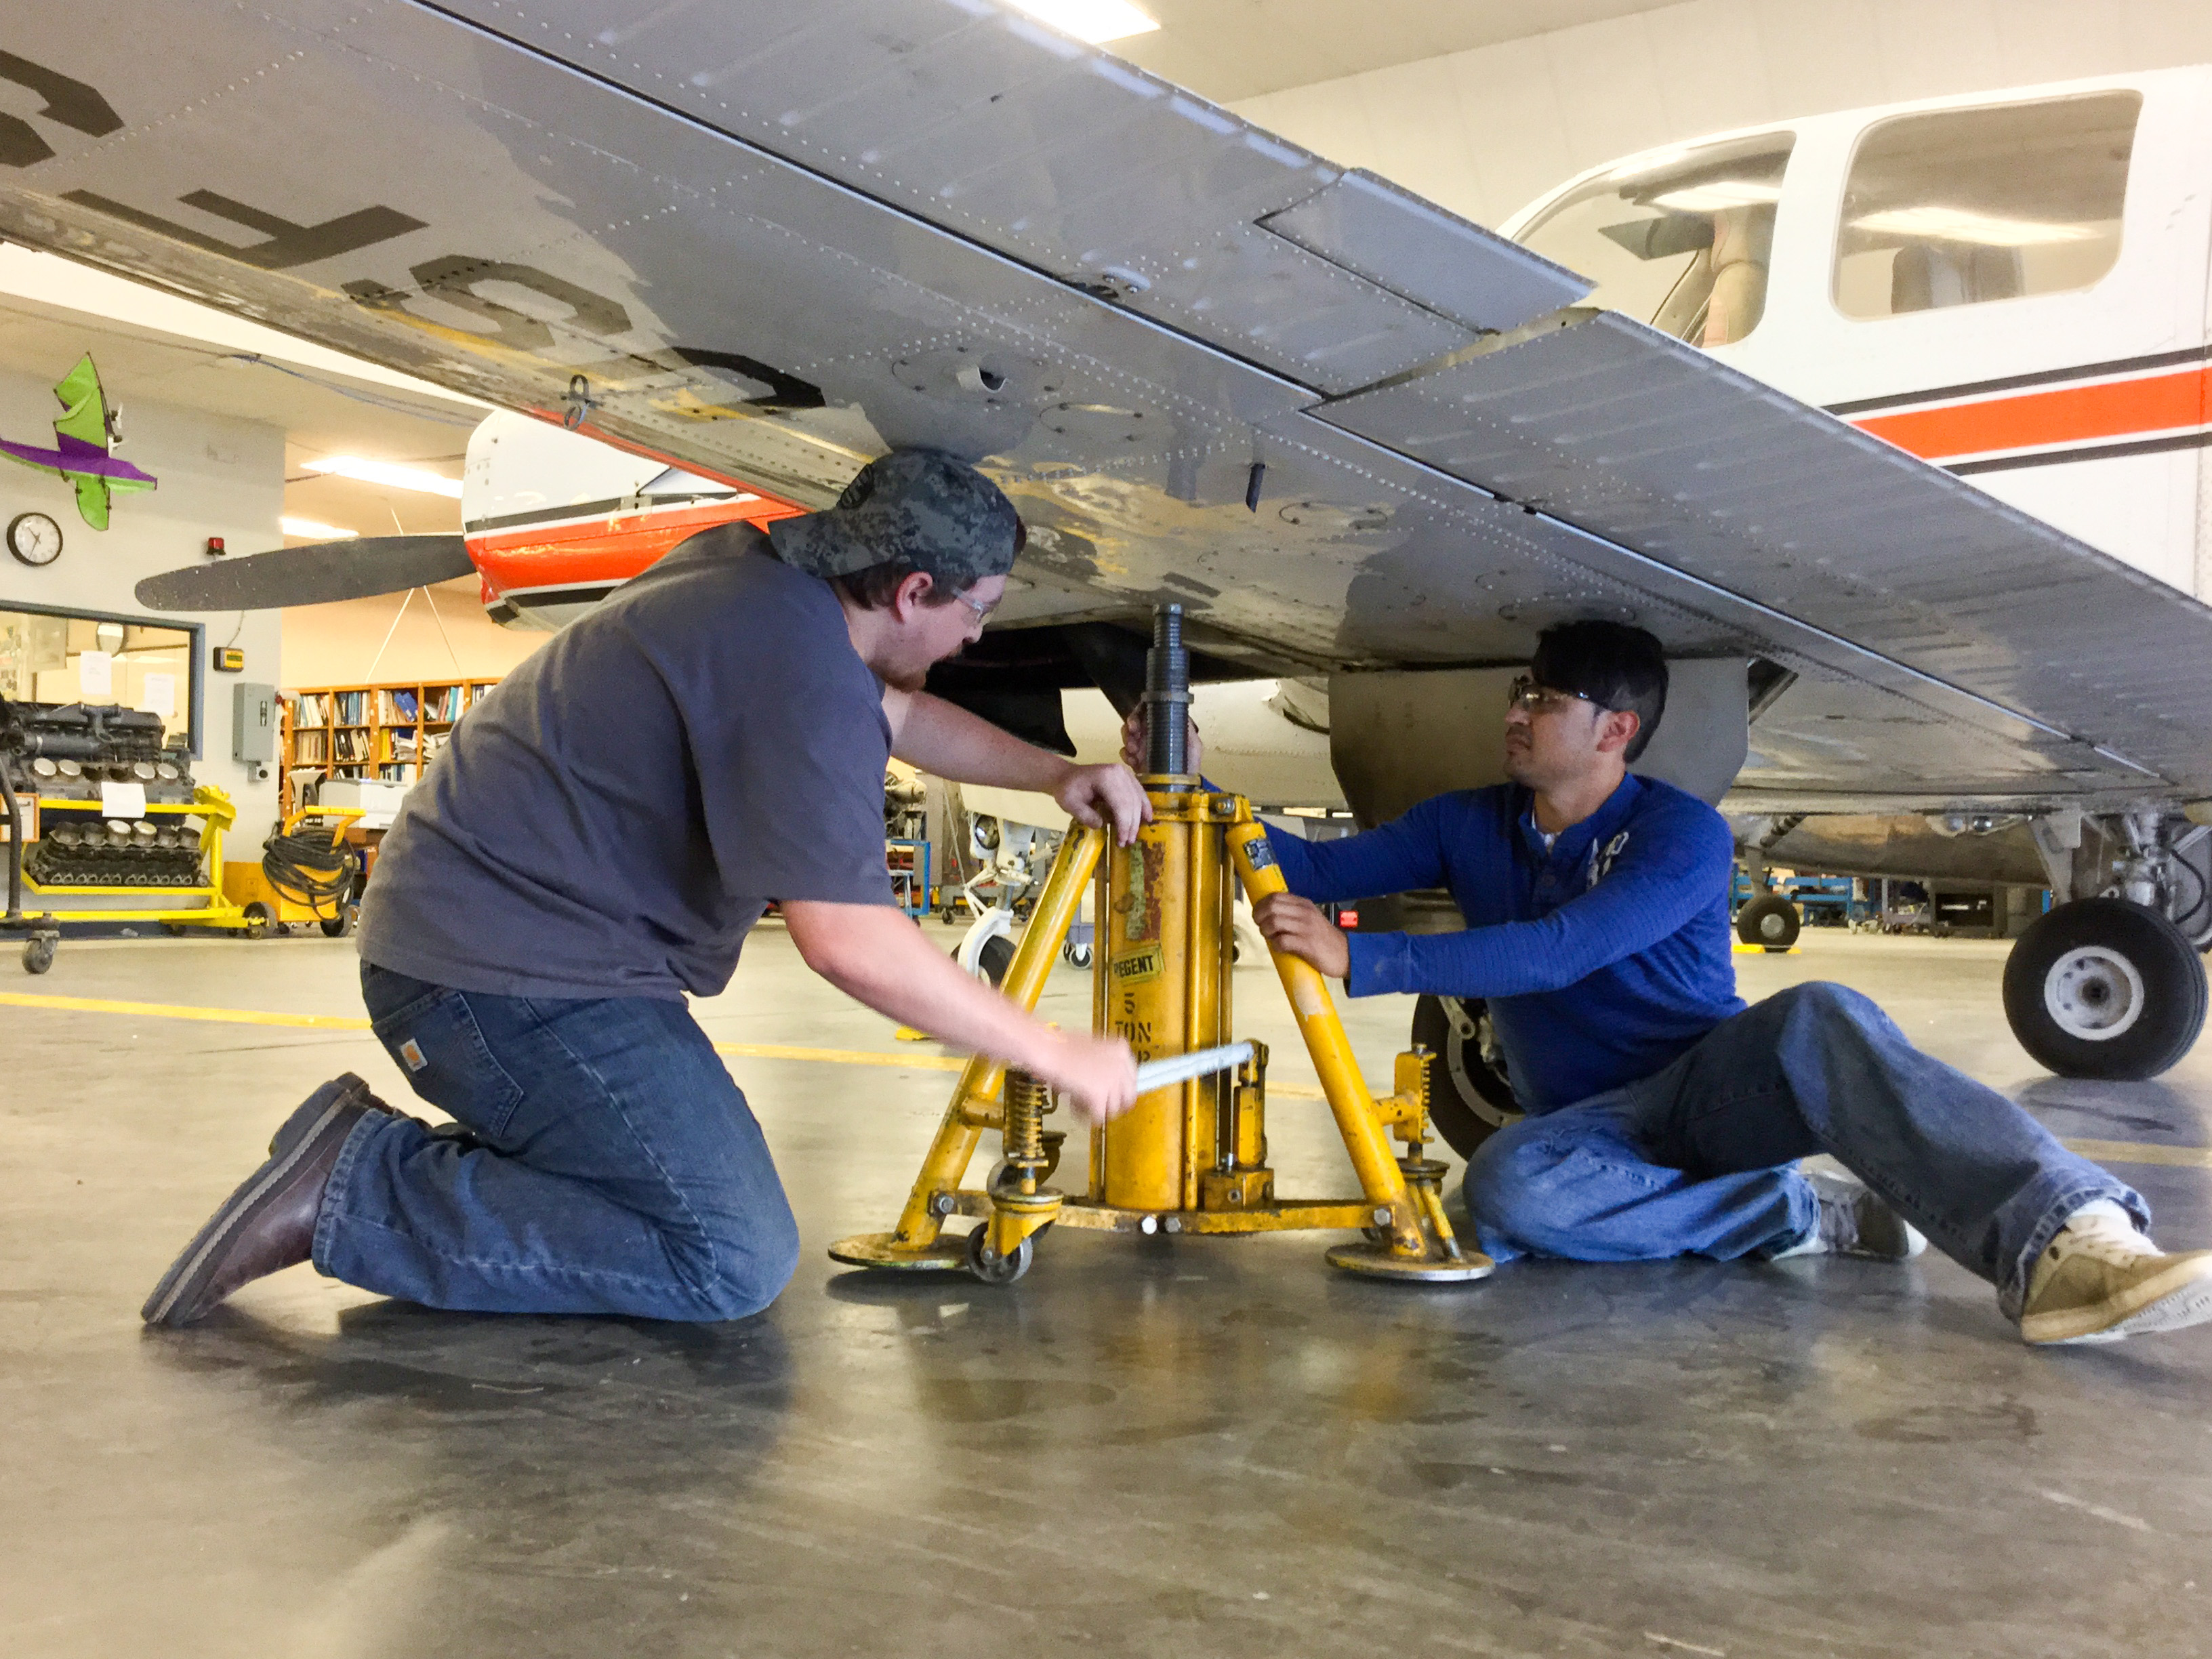 4-most-common-issues-in-aviation-maintenance-dviation-we-get-it-done